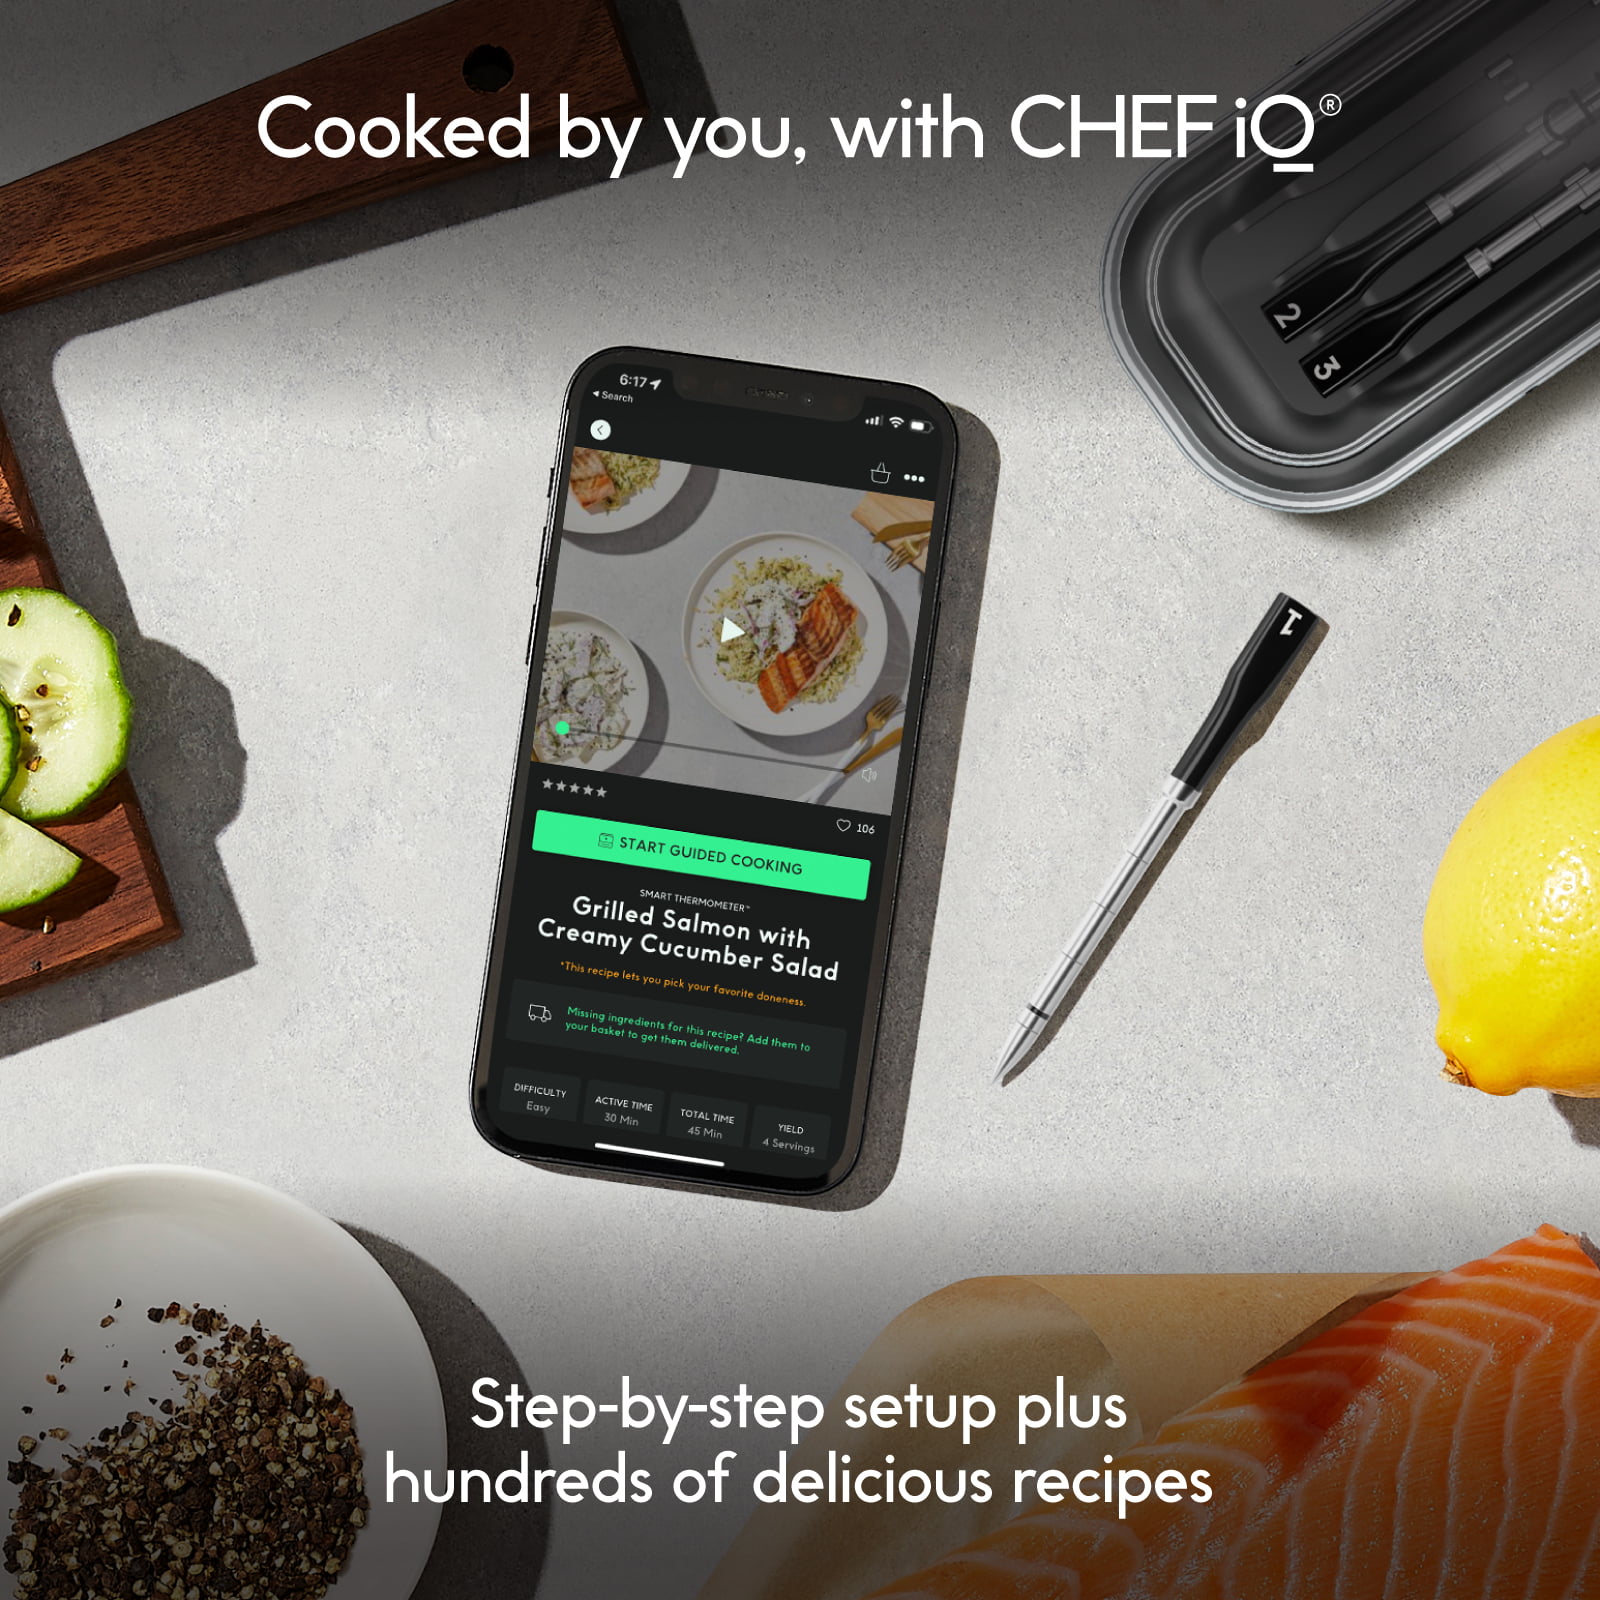  CHEF iQ Smart Wireless Meat Thermometer with 2 Ultra